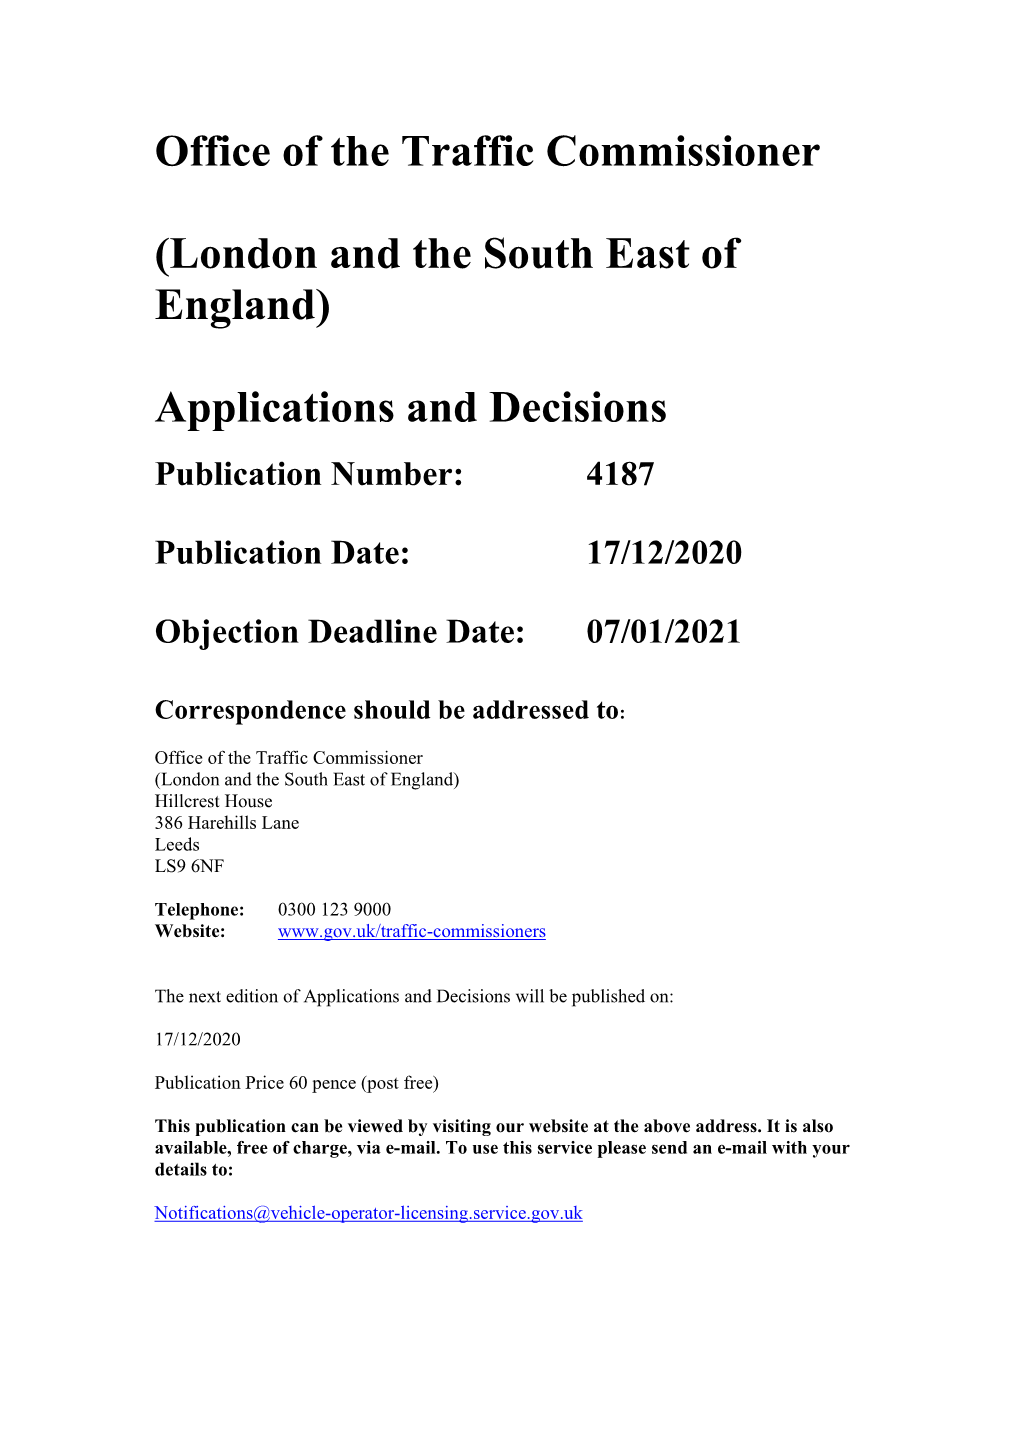 Applications and Decisions for London and the South East 4187